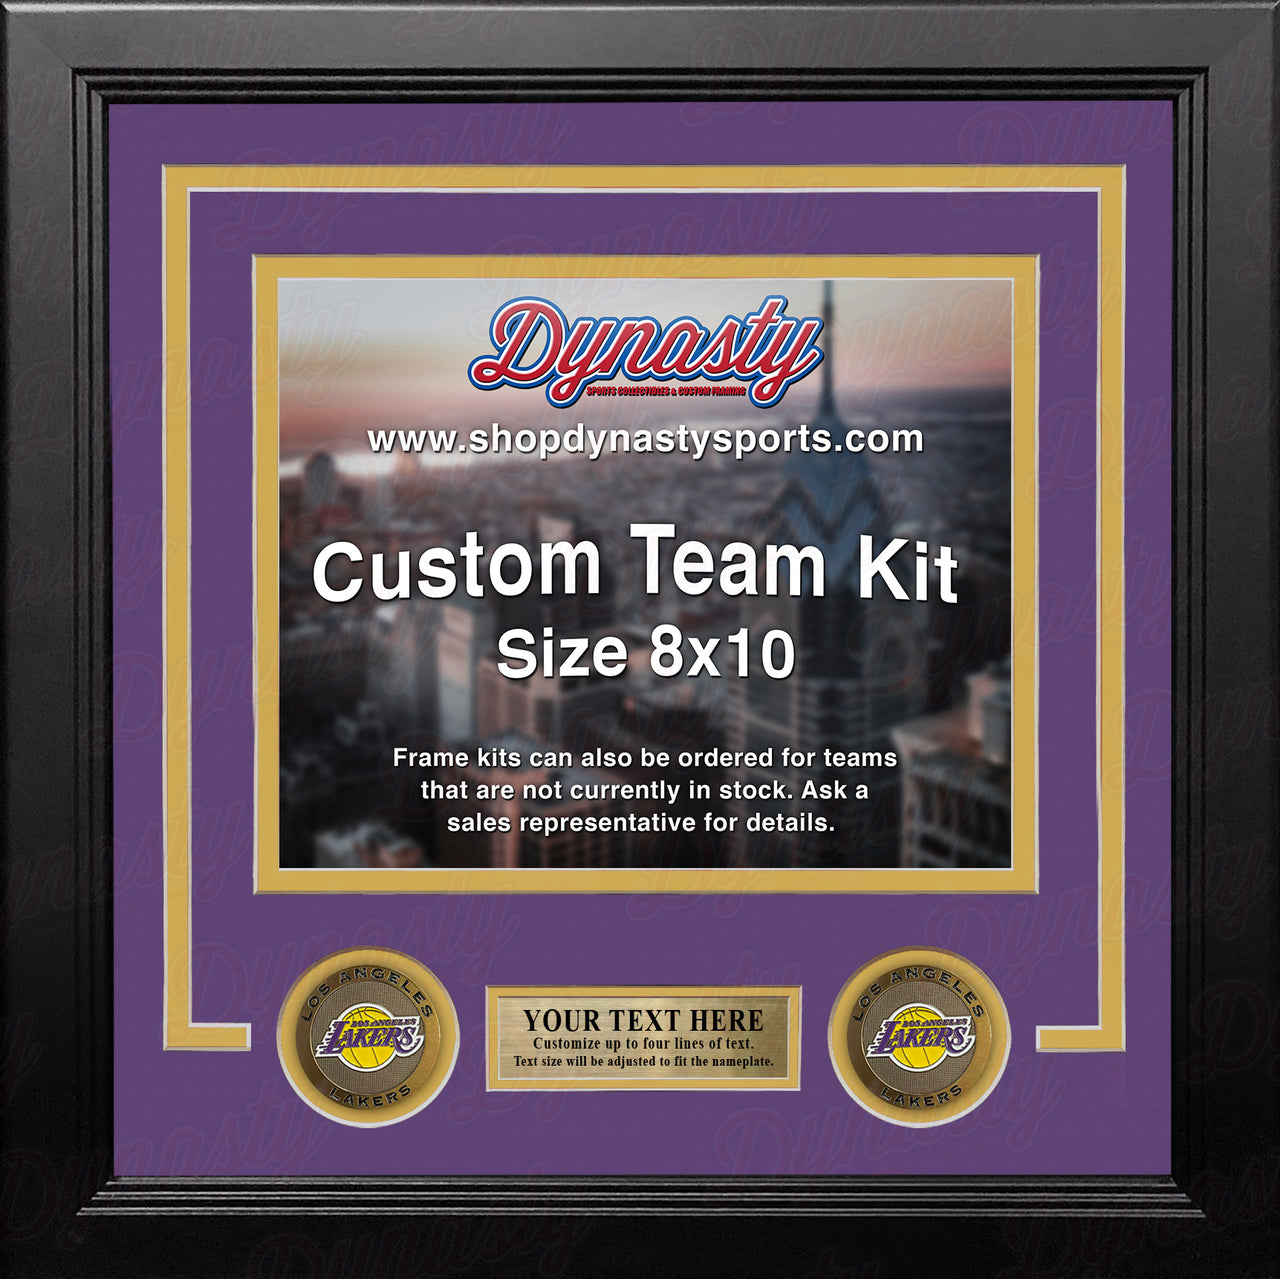 Los Angeles Lakers Custom NBA Basketball 8x10 Picture Frame Kit (Multiple Colors)